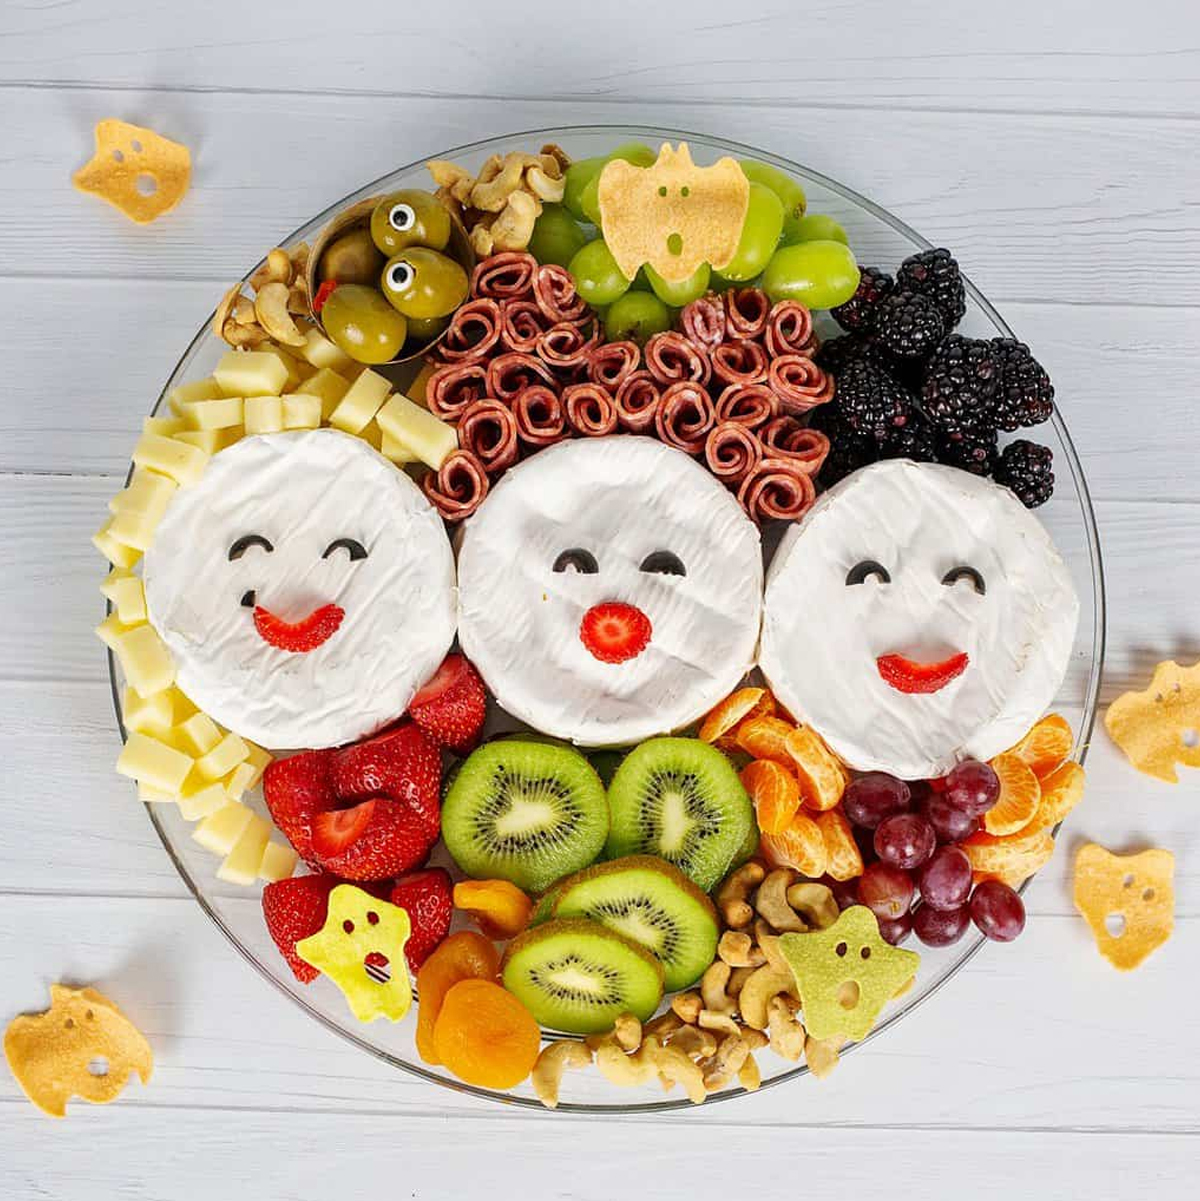 Salami, cheese, grapes, olives, berries, grapes, and kiwi are displayed on Big Family Blessings Hocus Pocus board.